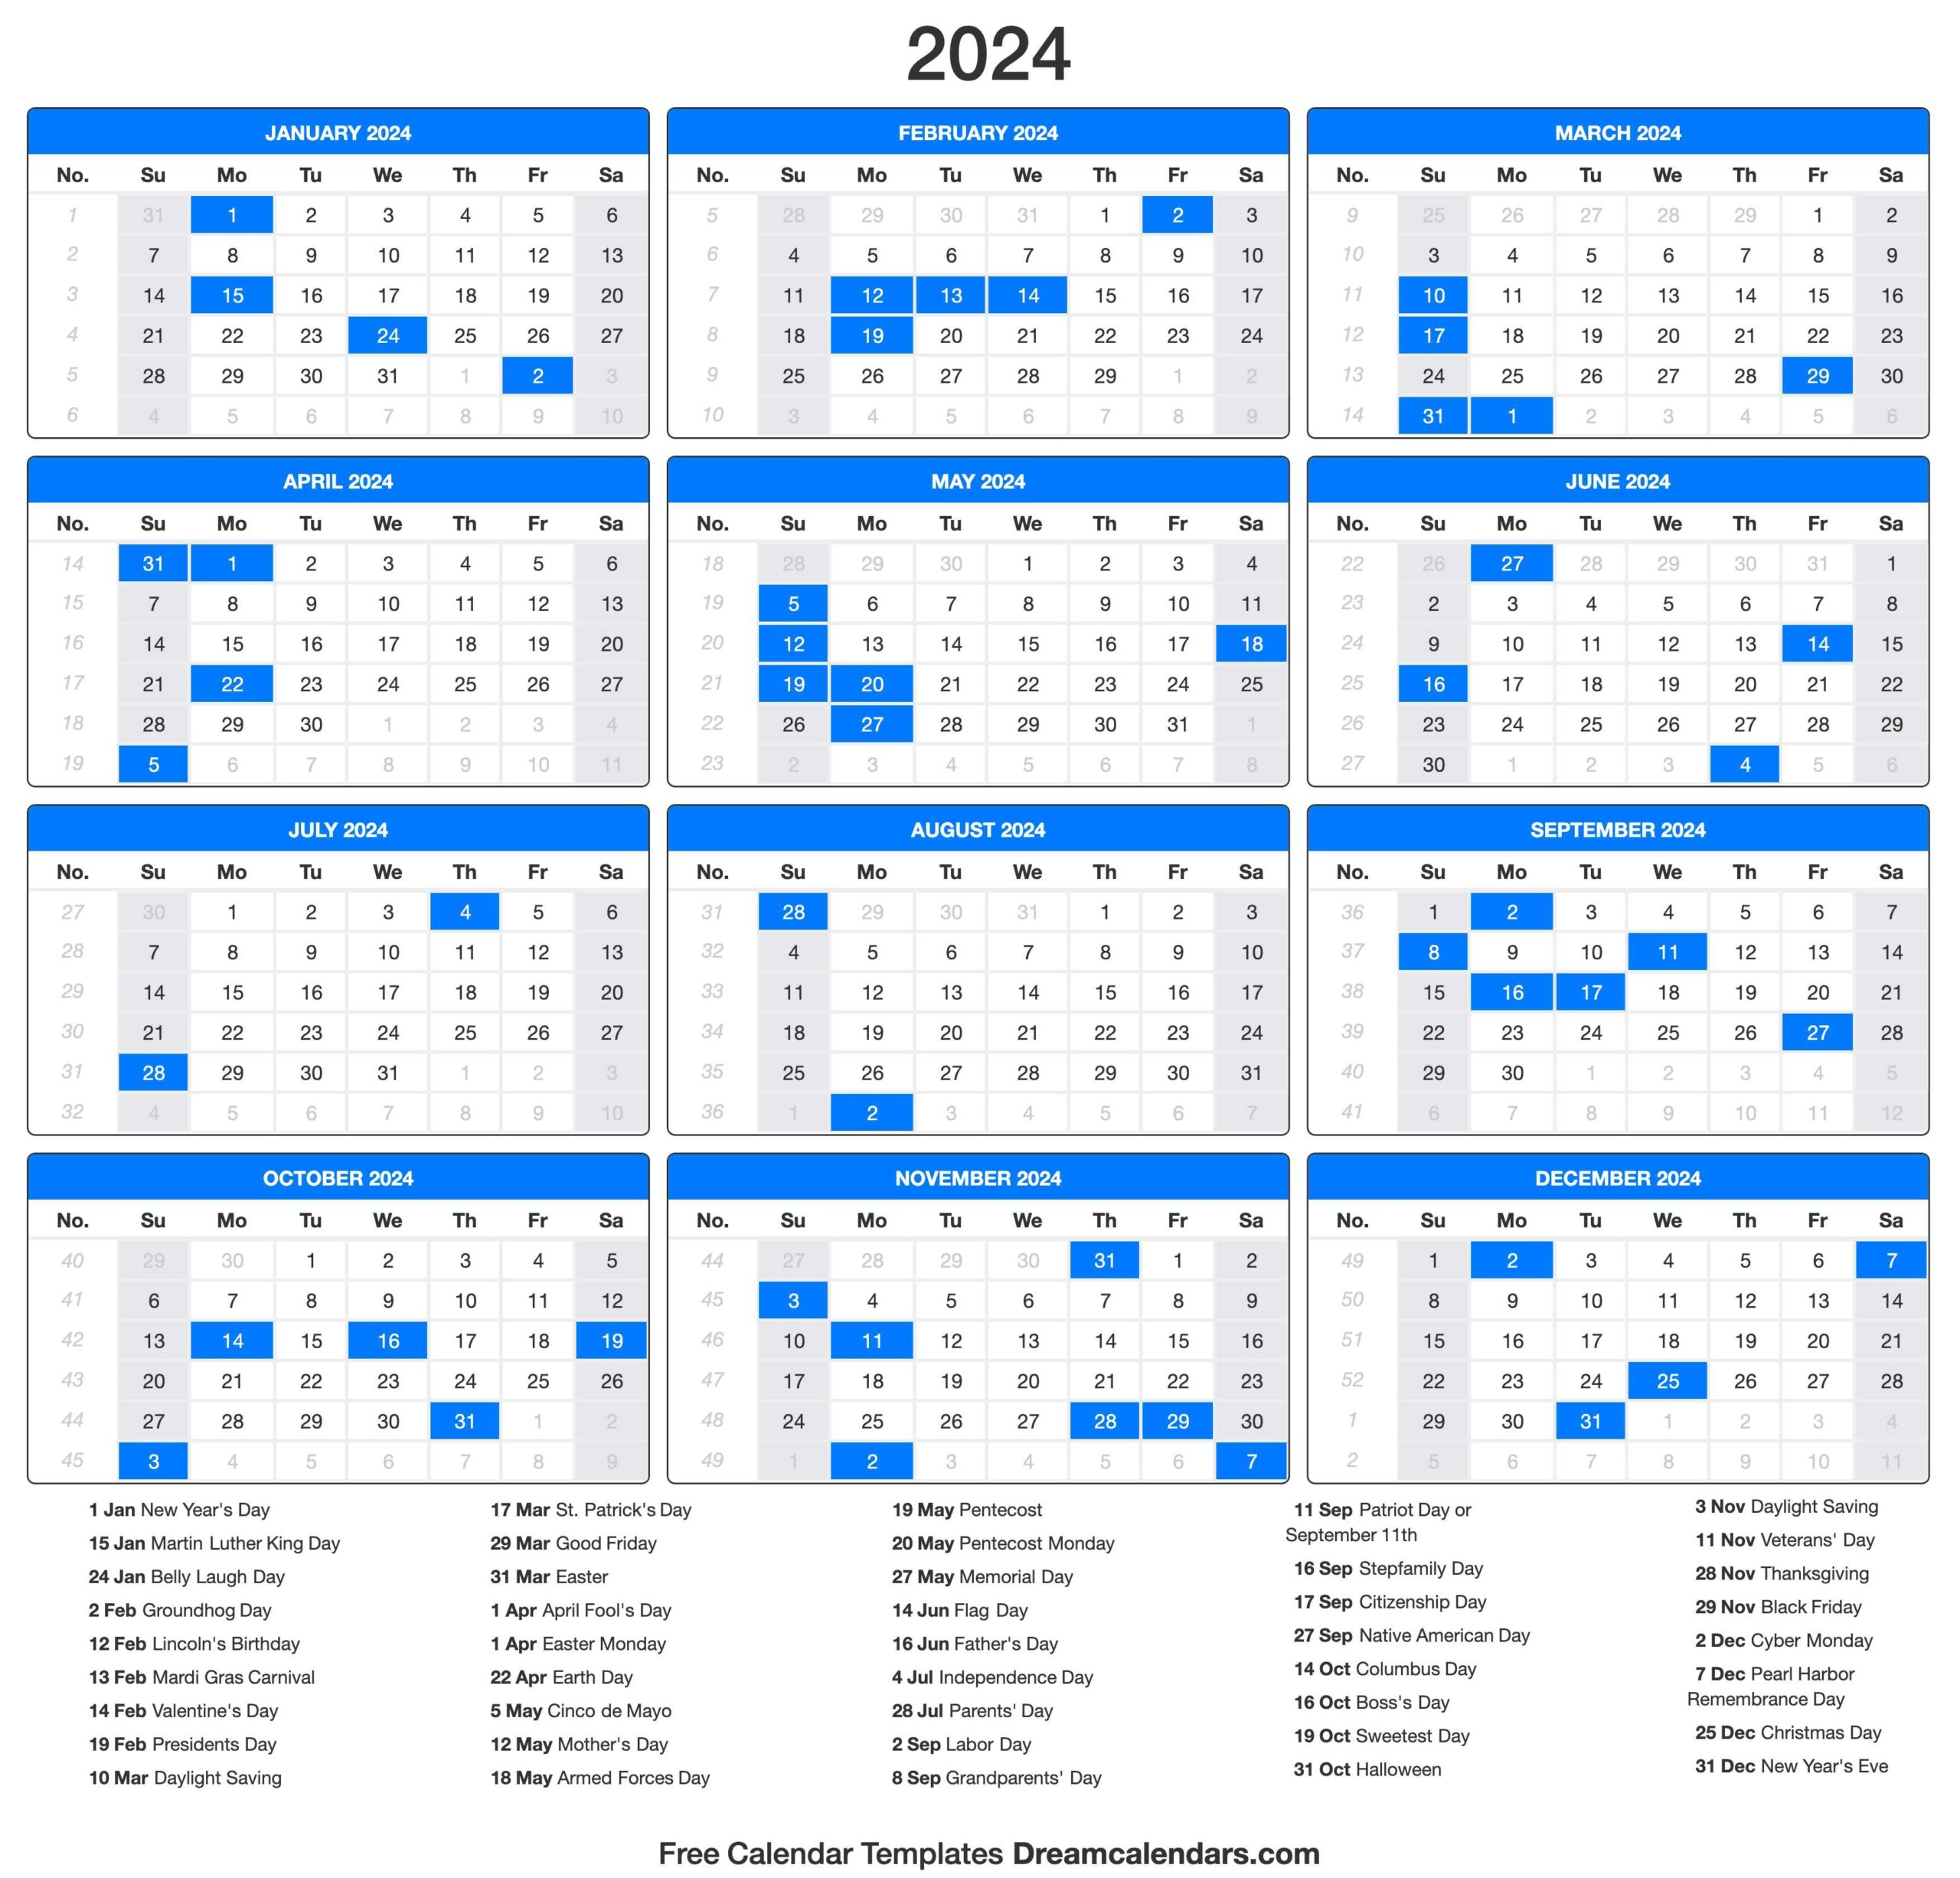 2024 Calendar - Free Printable 2024 Calendar With Holidays Time And Date